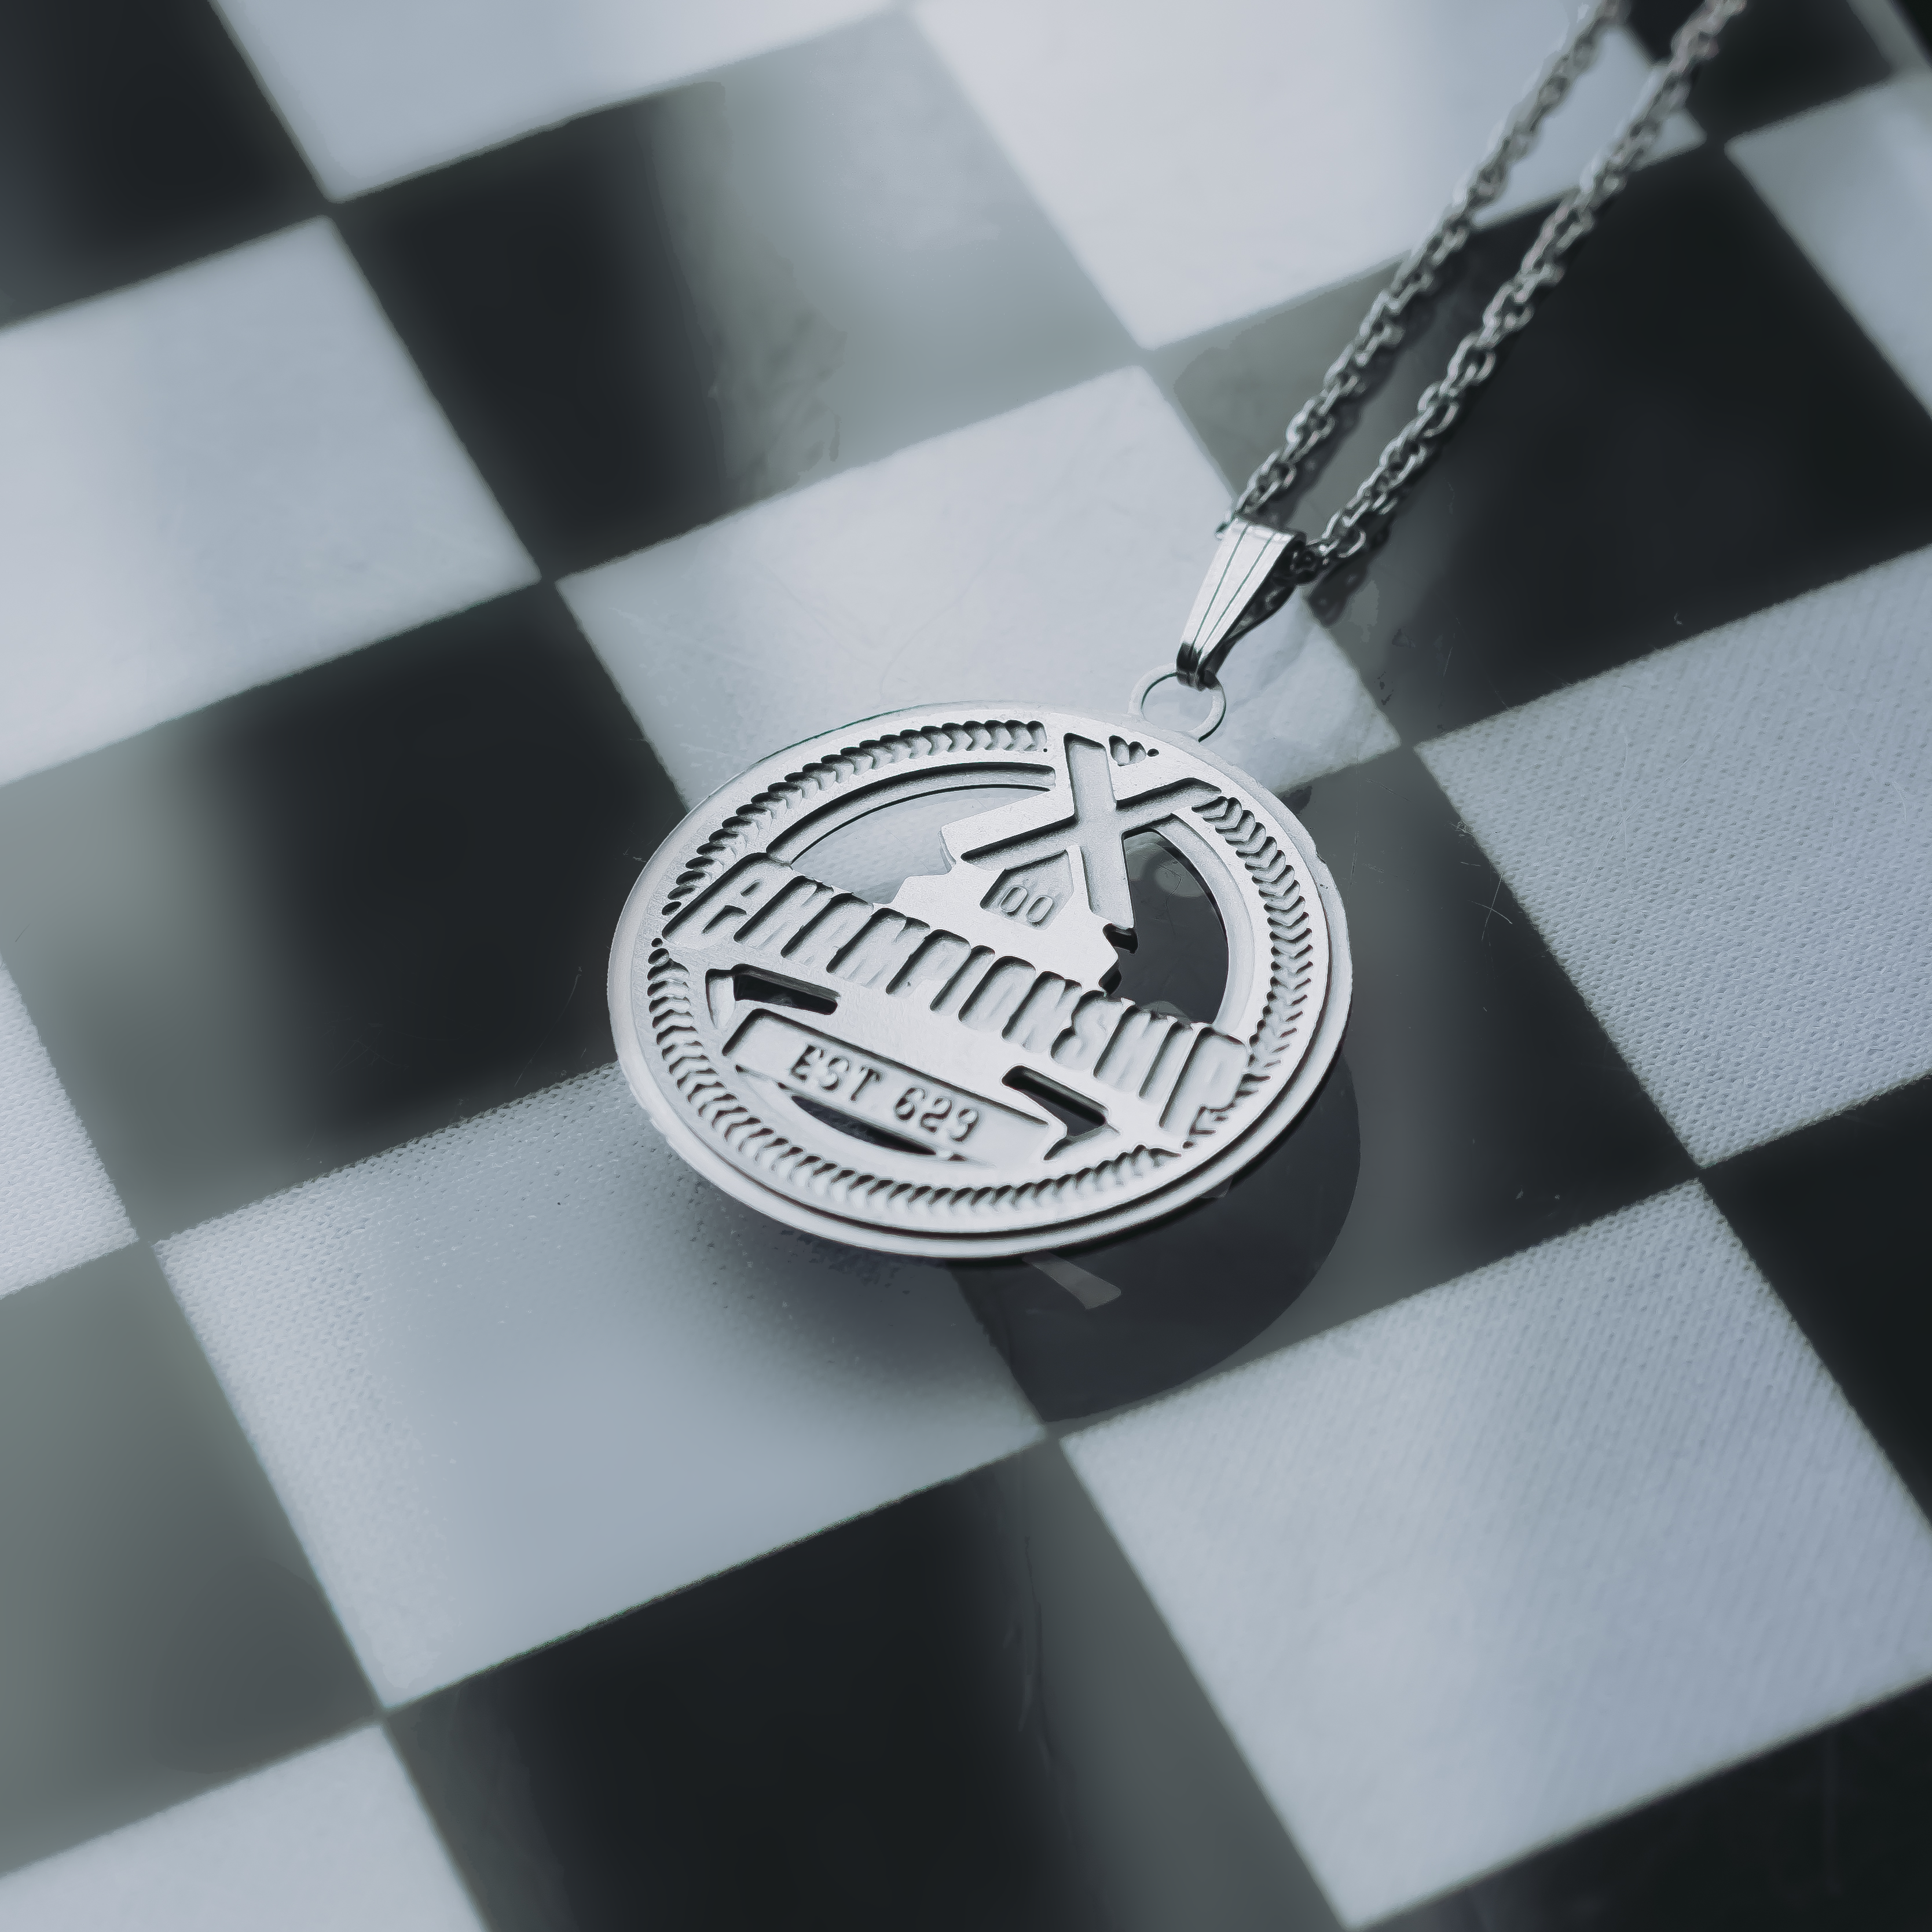 CHAMPIONSHIP Medallion Necklace - Silver